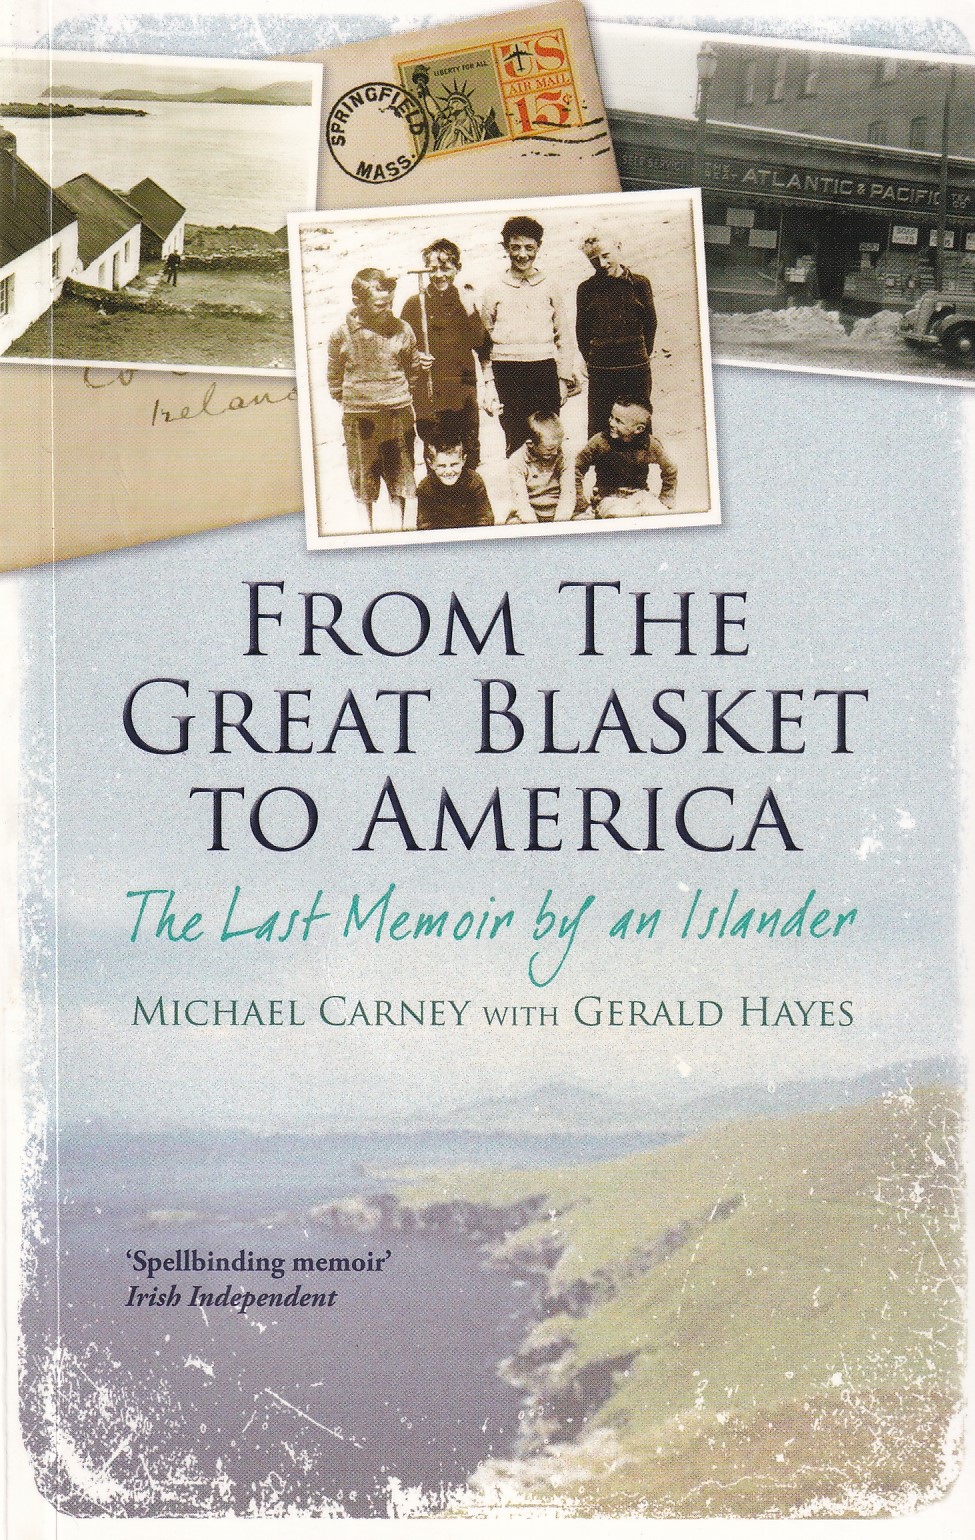 From the Great Blasket to America: The Last Memoir by an Islander by Michael Carney with Gerald Hayes